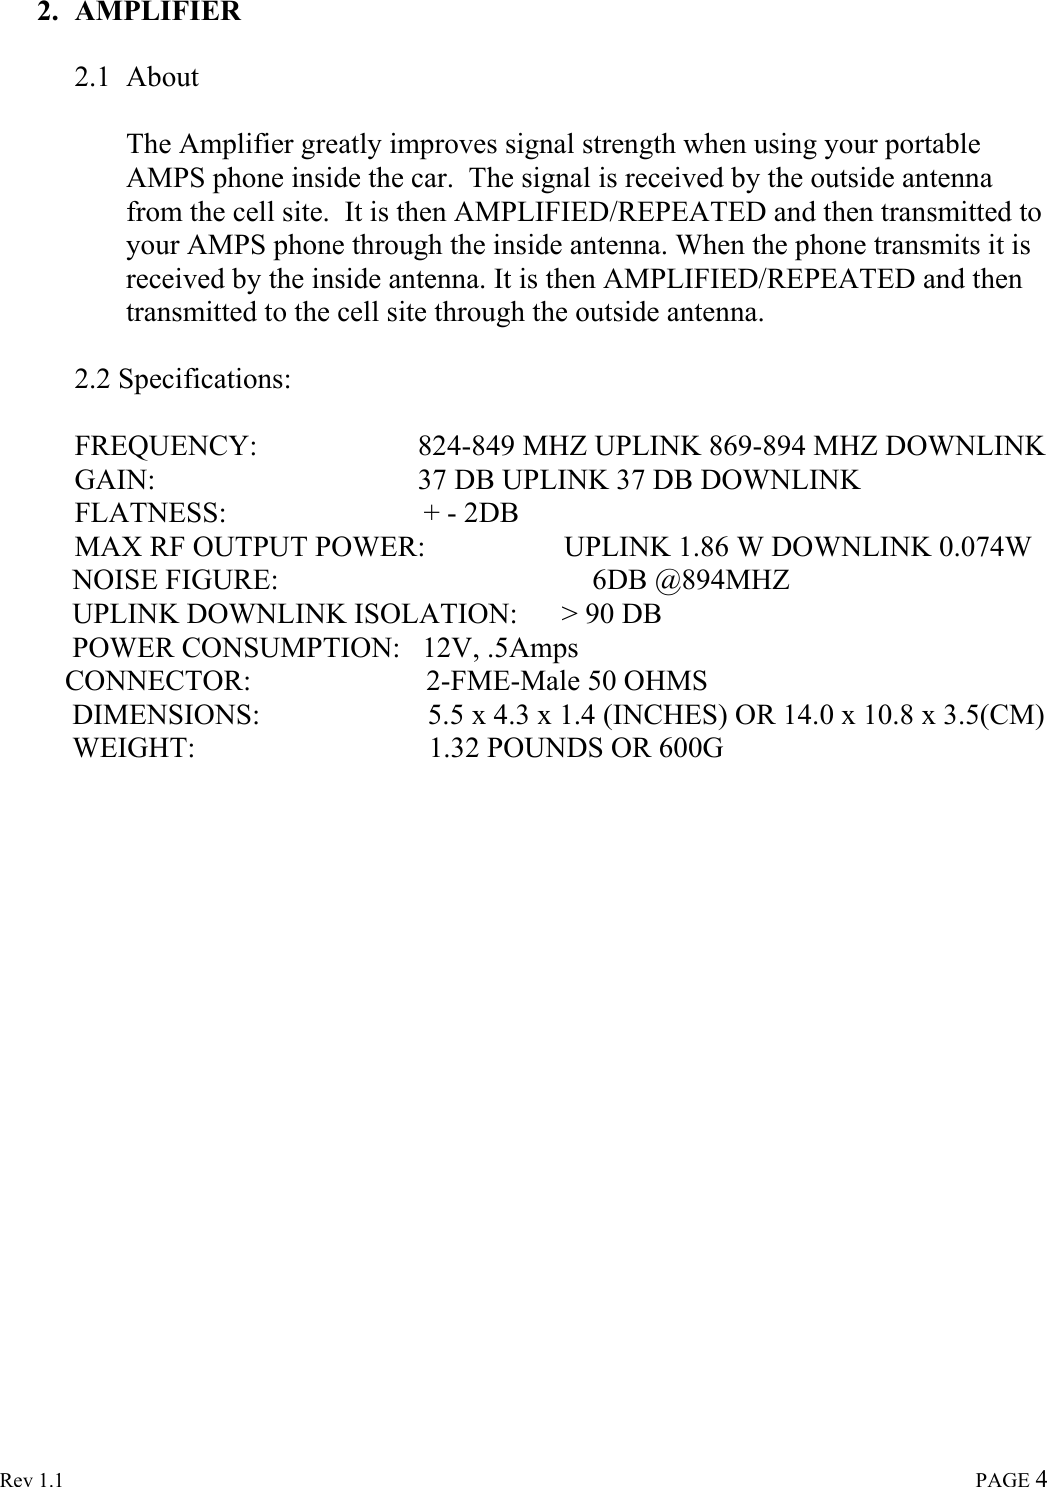  Rev 1.1                                                                                                                                                                               PAGE 4 2. AMPLIFIER   2.1 About   The Amplifier greatly improves signal strength when using your portable AMPS phone inside the car.  The signal is received by the outside antenna from the cell site.  It is then AMPLIFIED/REPEATED and then transmitted to your AMPS phone through the inside antenna. When the phone transmits it is received by the inside antenna. It is then AMPLIFIED/REPEATED and then transmitted to the cell site through the outside antenna.    2.2 Specifications:  FREQUENCY:                      824-849 MHZ UPLINK 869-894 MHZ DOWNLINK GAIN:                                    37 DB UPLINK 37 DB DOWNLINK FLATNESS:                           + - 2DB MAX RF OUTPUT POWER:                   UPLINK 1.86 W DOWNLINK 0.074W           NOISE FIGURE:                                           6DB @894MHZ           UPLINK DOWNLINK ISOLATION:      &gt; 90 DB           POWER CONSUMPTION:   12V, .5Amps          CONNECTOR:                        2-FME-Male 50 OHMS           DIMENSIONS:                       5.5 x 4.3 x 1.4 (INCHES) OR 14.0 x 10.8 x 3.5(CM)           WEIGHT:                                1.32 POUNDS OR 600G                     